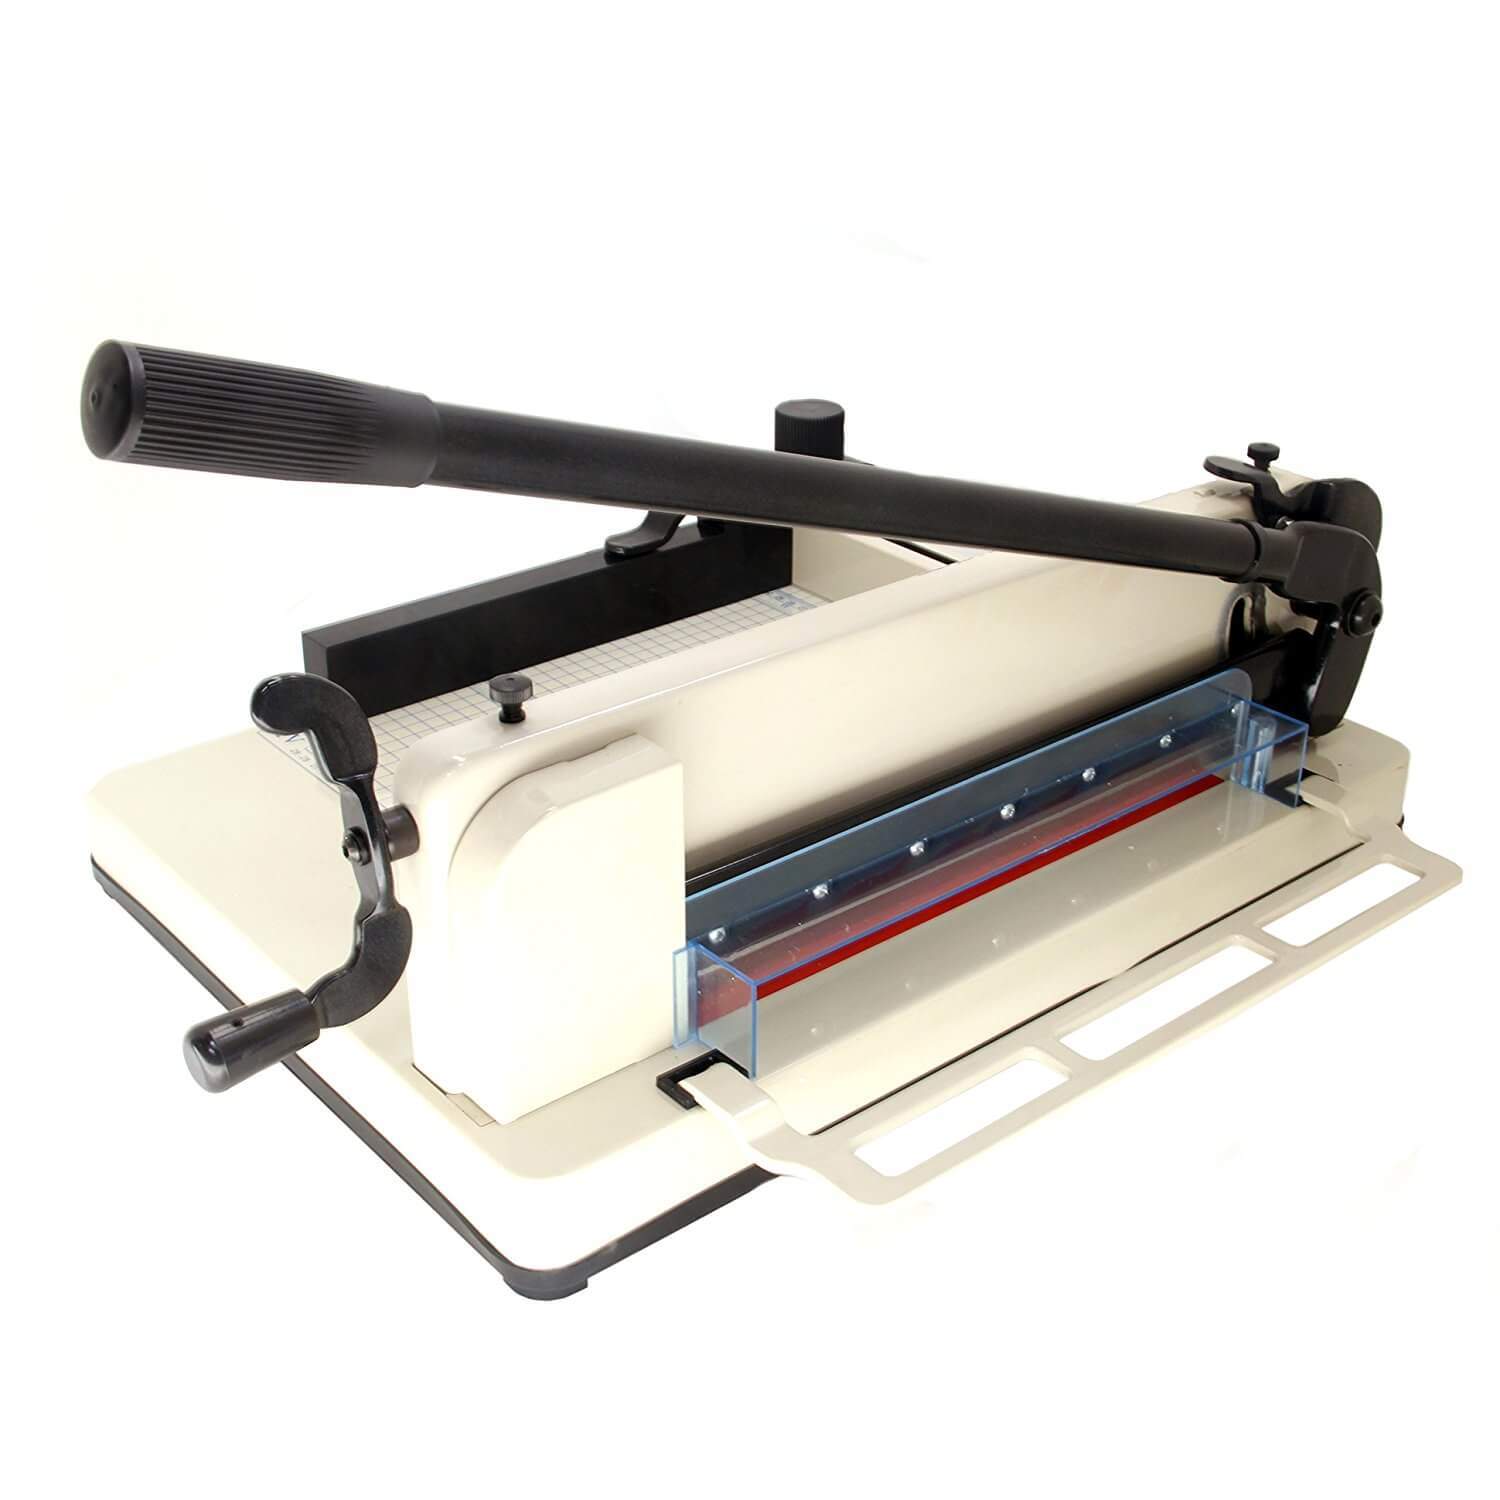 HFS (R) New Heavy Duty Guillotine Paper Cutter